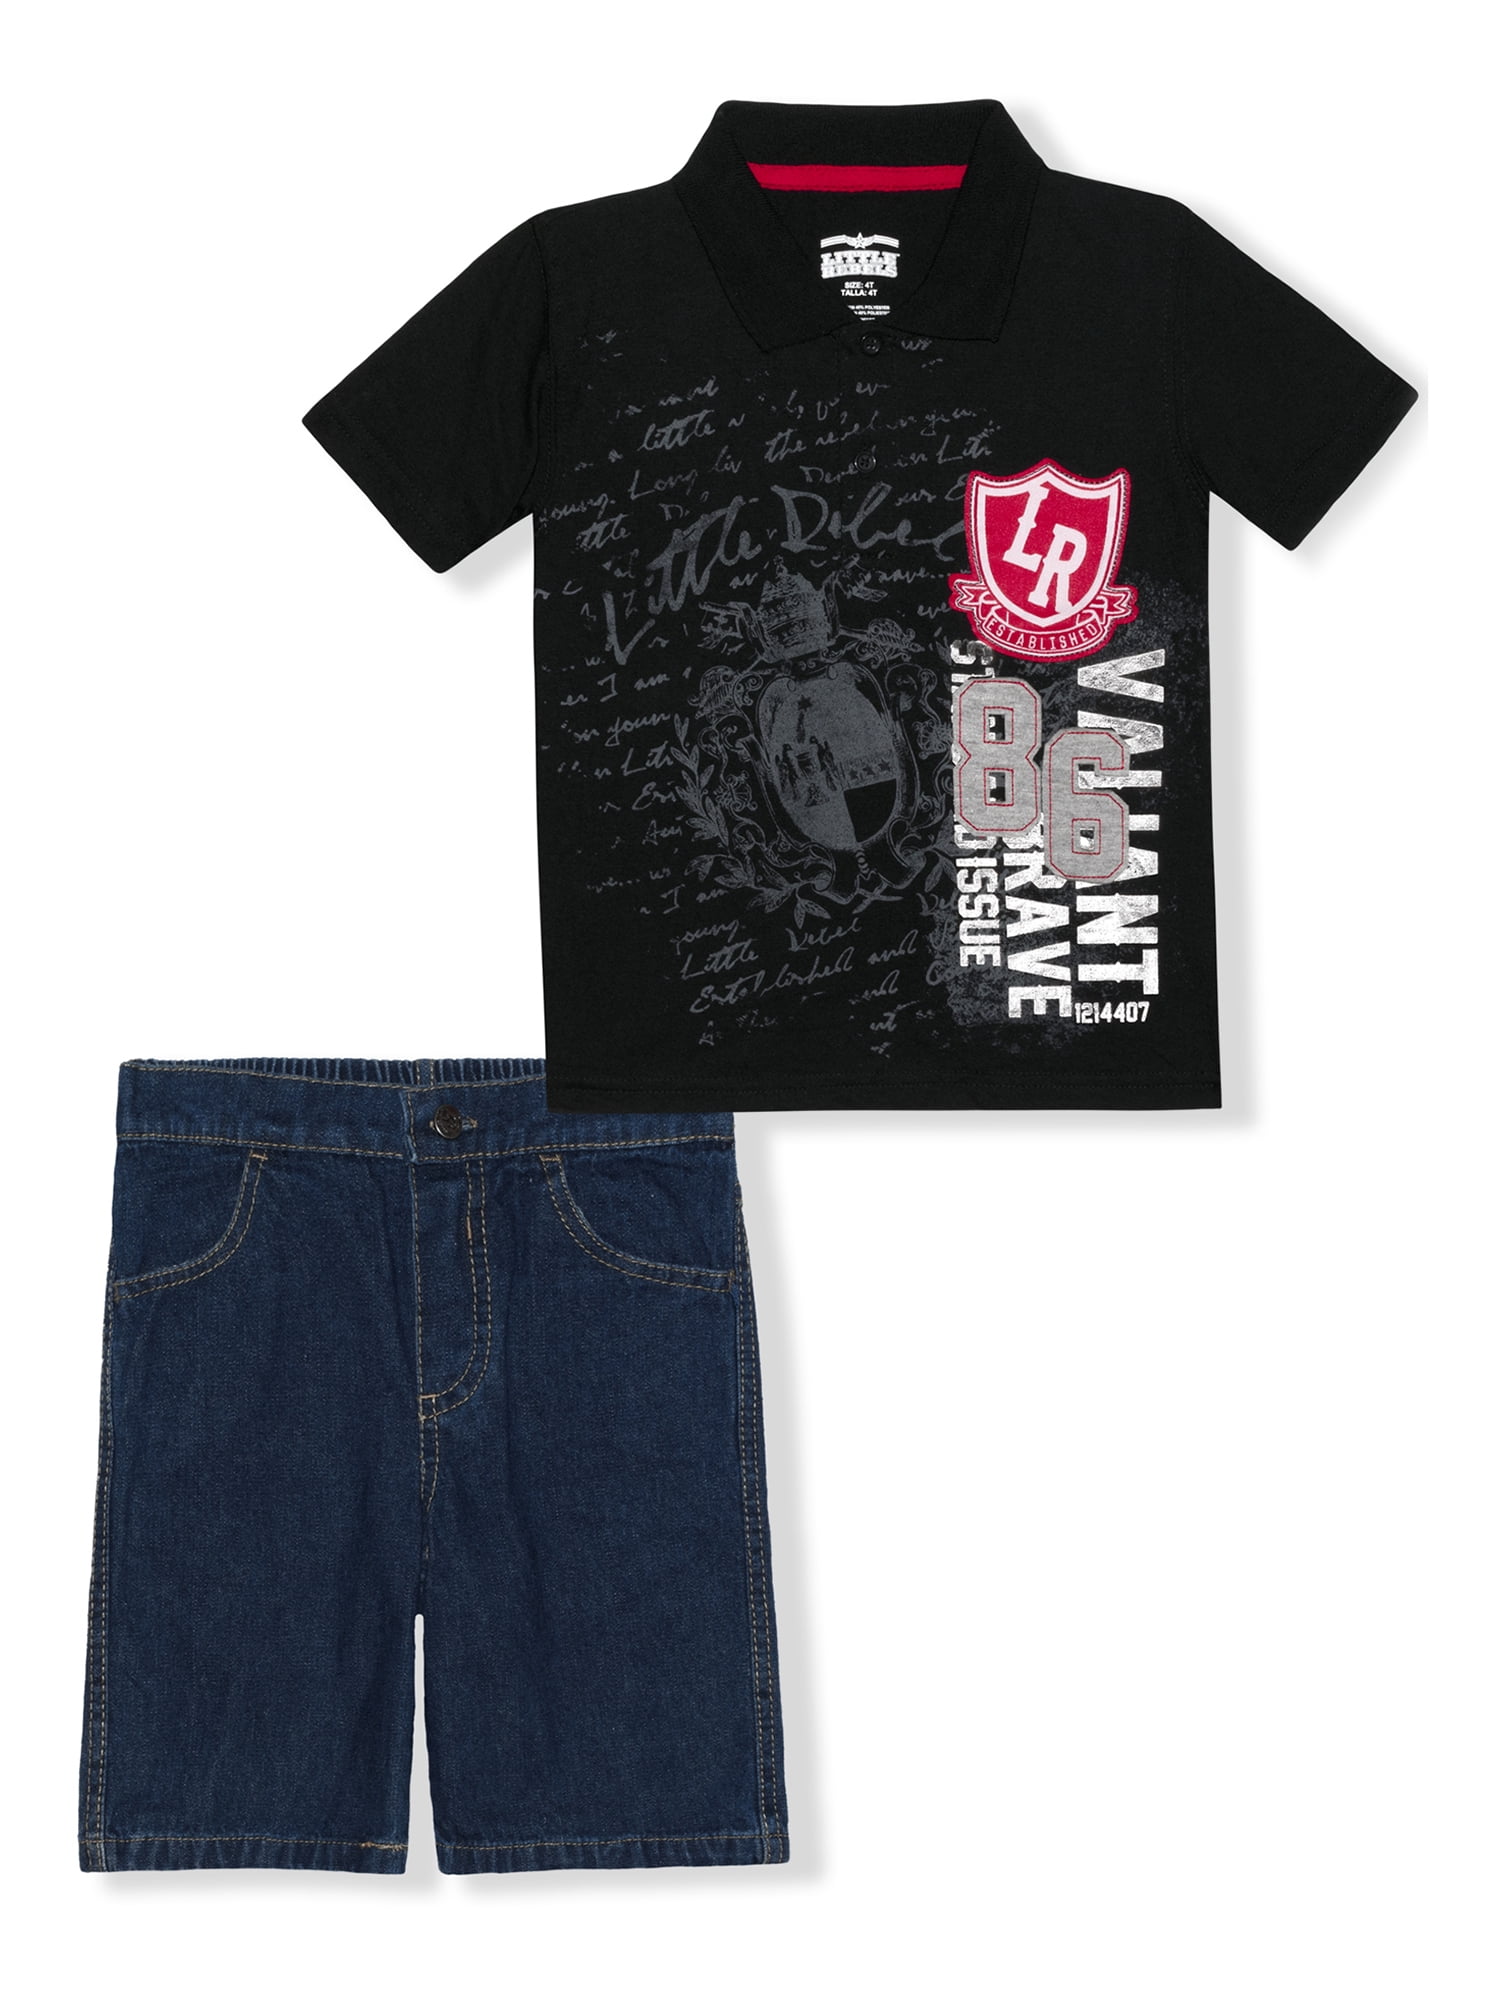 Details about   Little Rebels Boys 3 Piece Outfit 12 Mo Olive Blue Shirt Top Pants Casual Set 